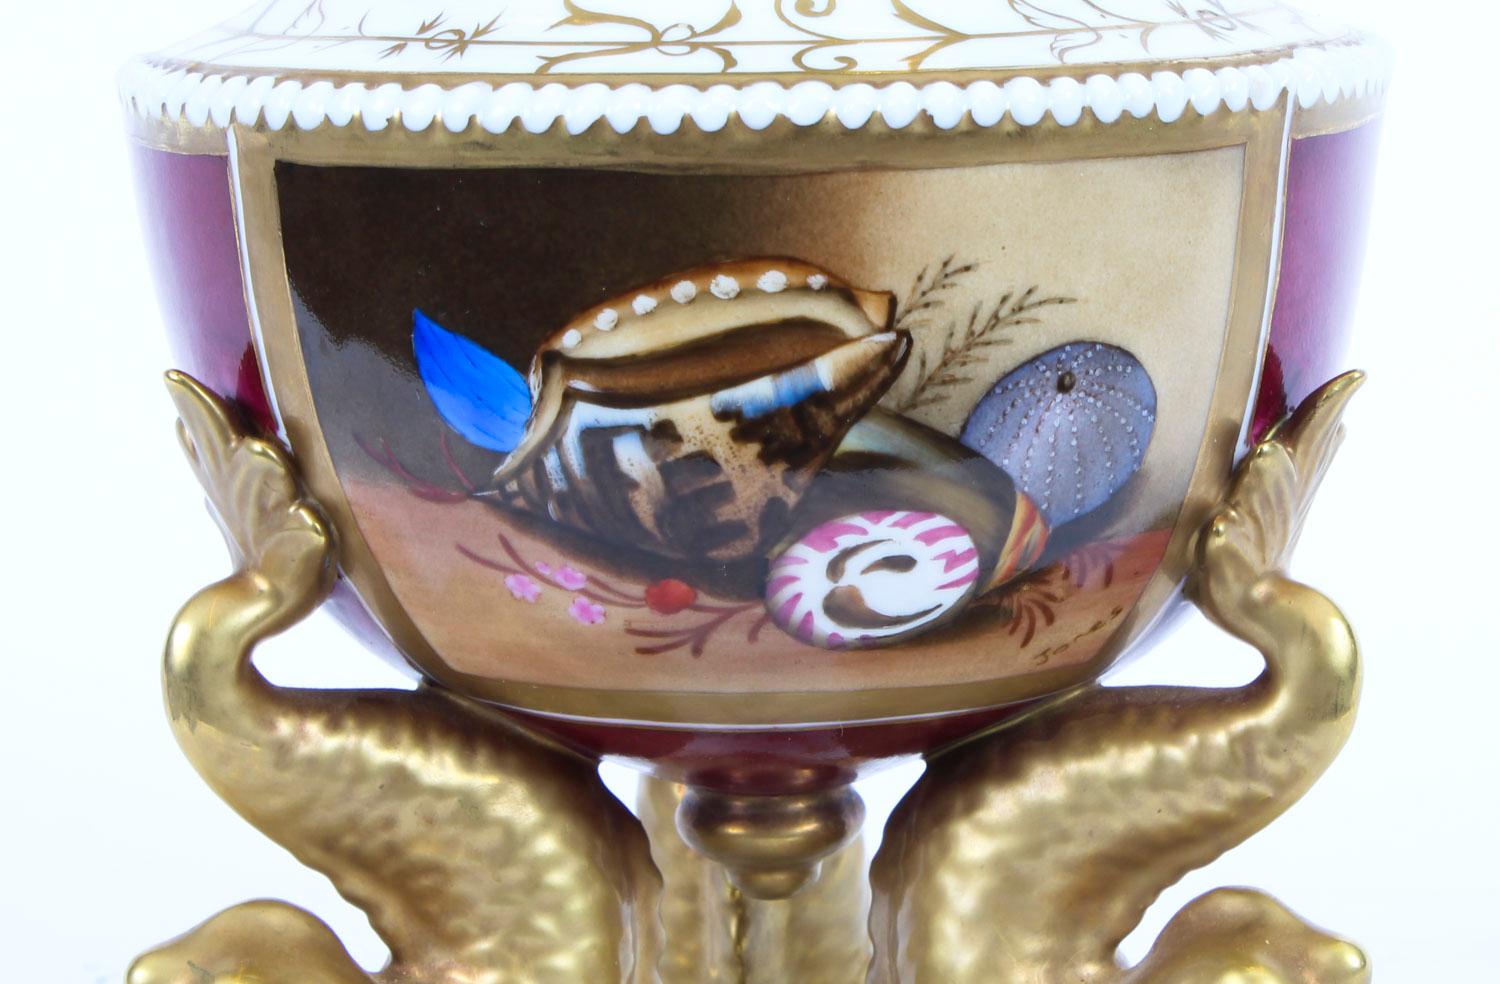 This is a beautiful English Samson 'Derby' pot pourri vase and cover date stamped 1863-1866.

The dish is of classical form and features a superbly hand painted panel of seashells, signed Jones, with gilded high lights on a burgundy ground.

It